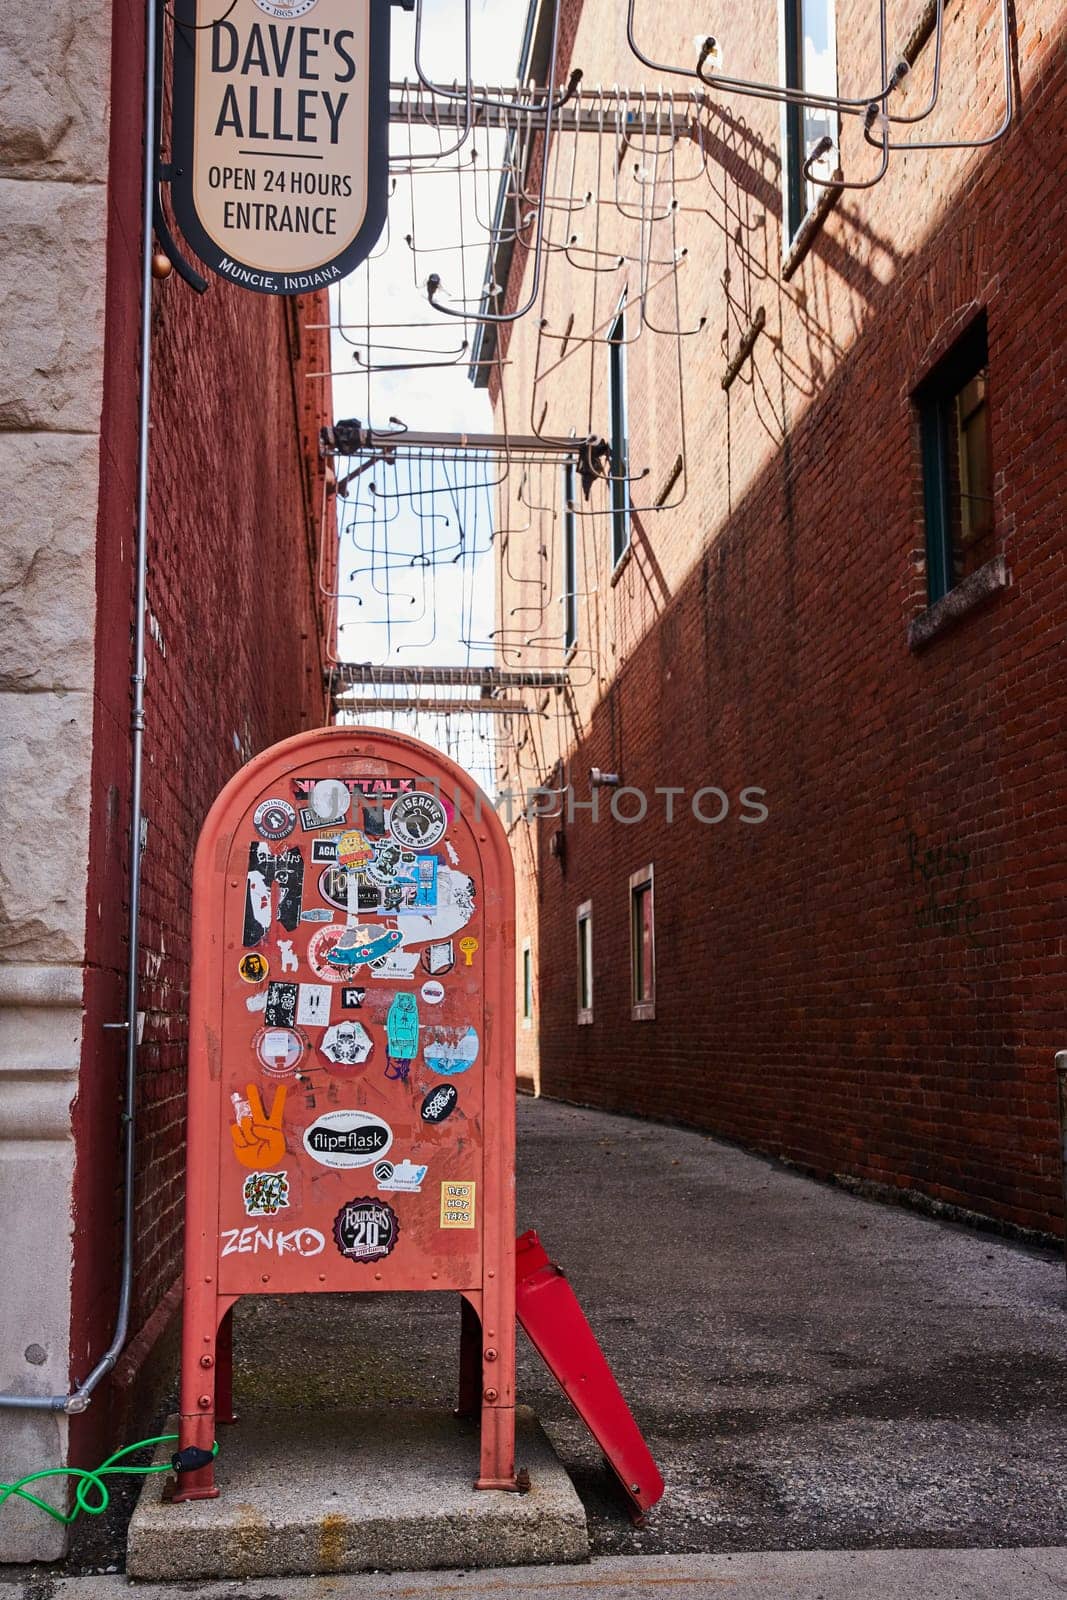 Dave's Alley Entrance with Sticker Art in Muncie by njproductions